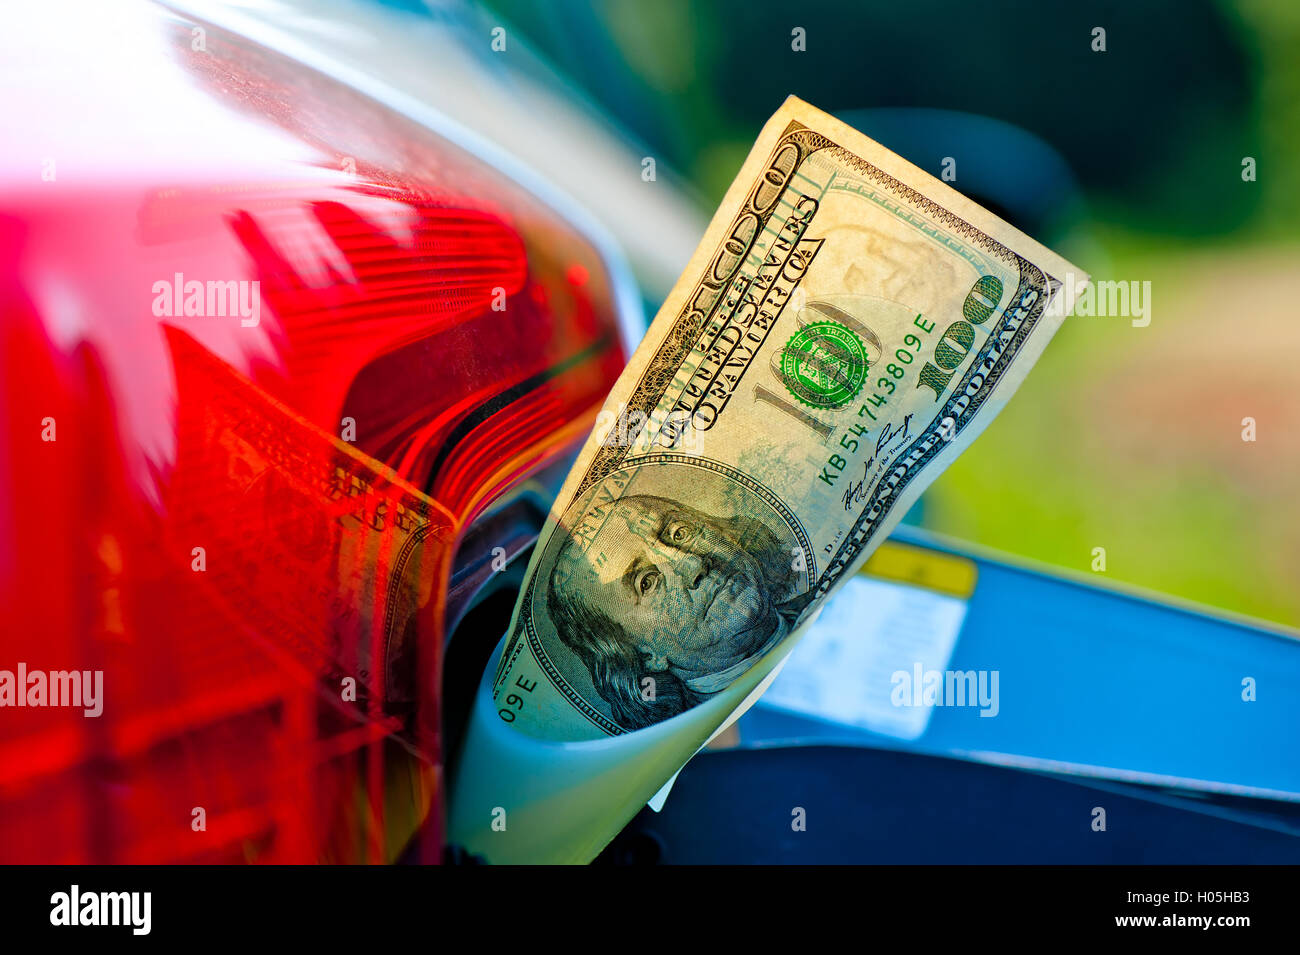 Hundred dollar bills in a vehicle fuel tank neck Stock Photo